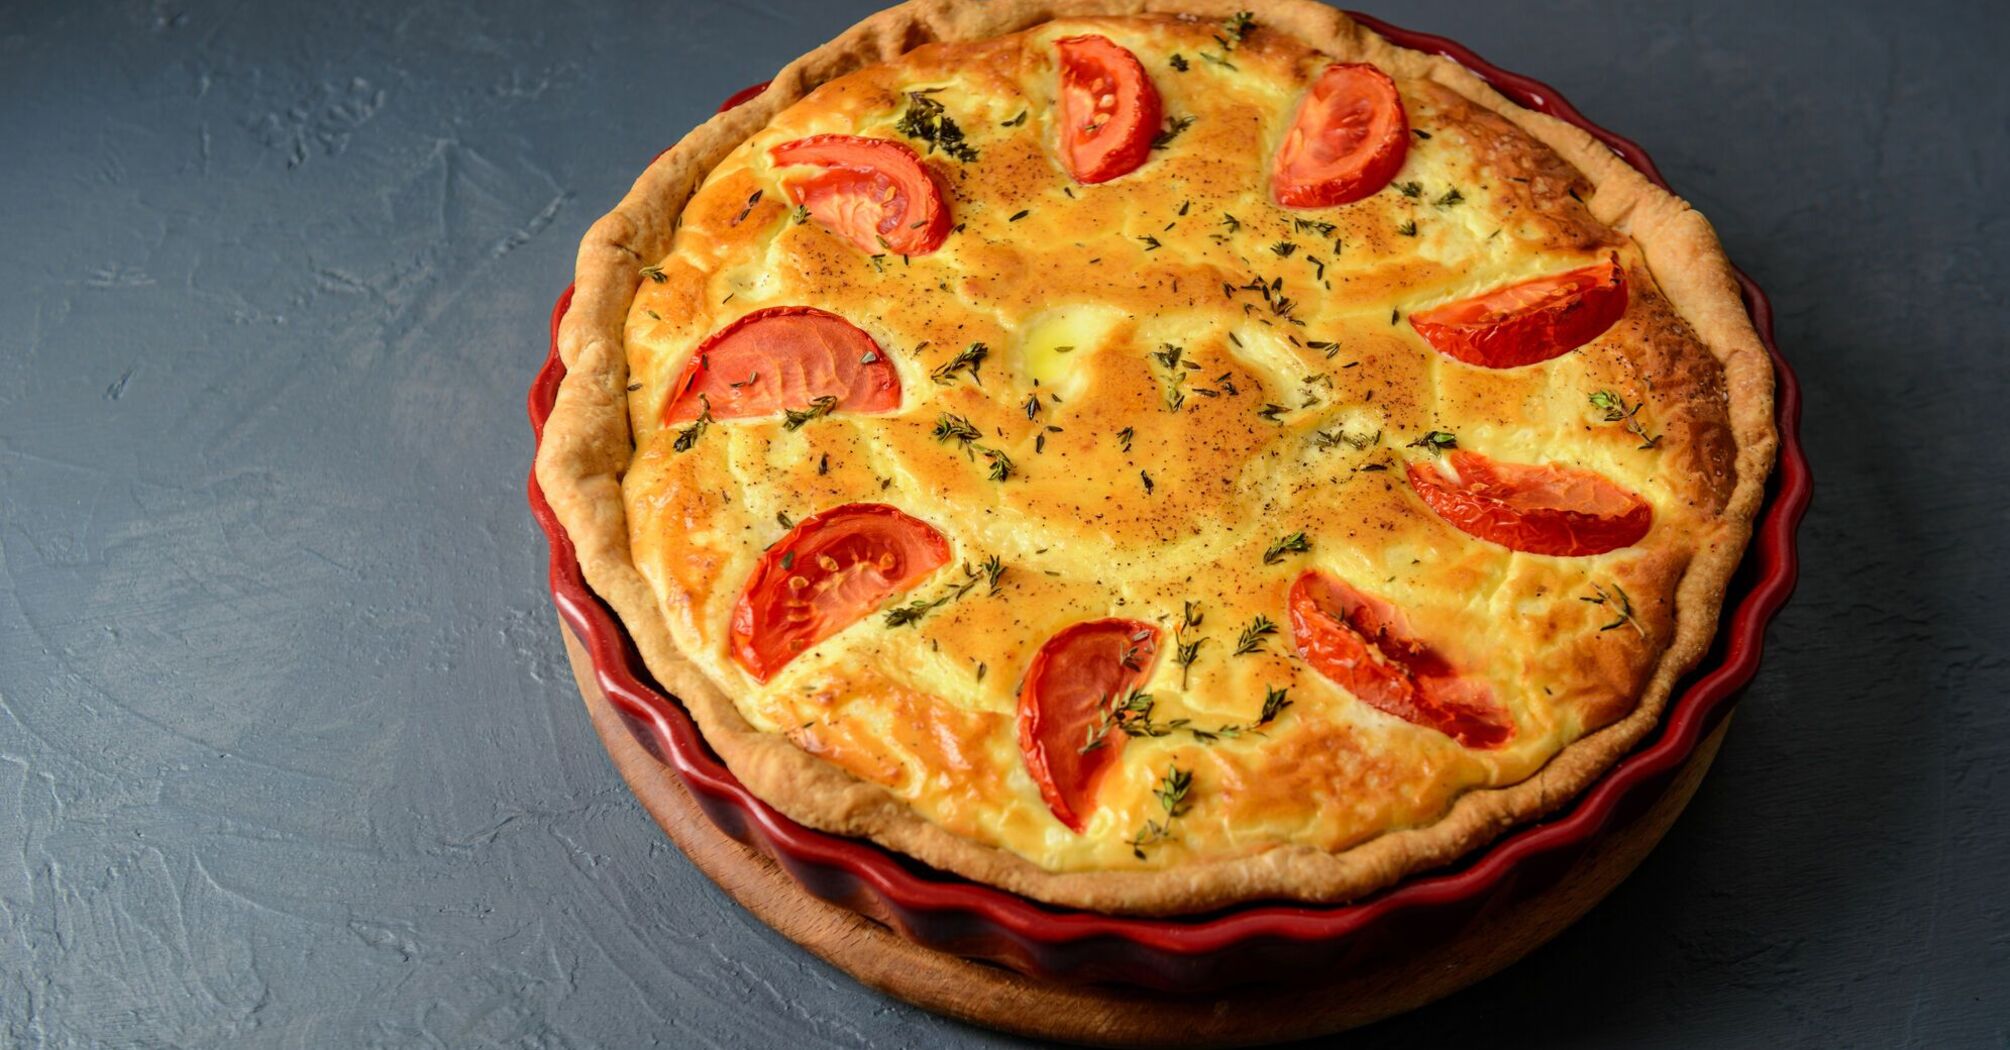 What to cook for dinner for a large company: a hearty chicken quiche on crispy dough